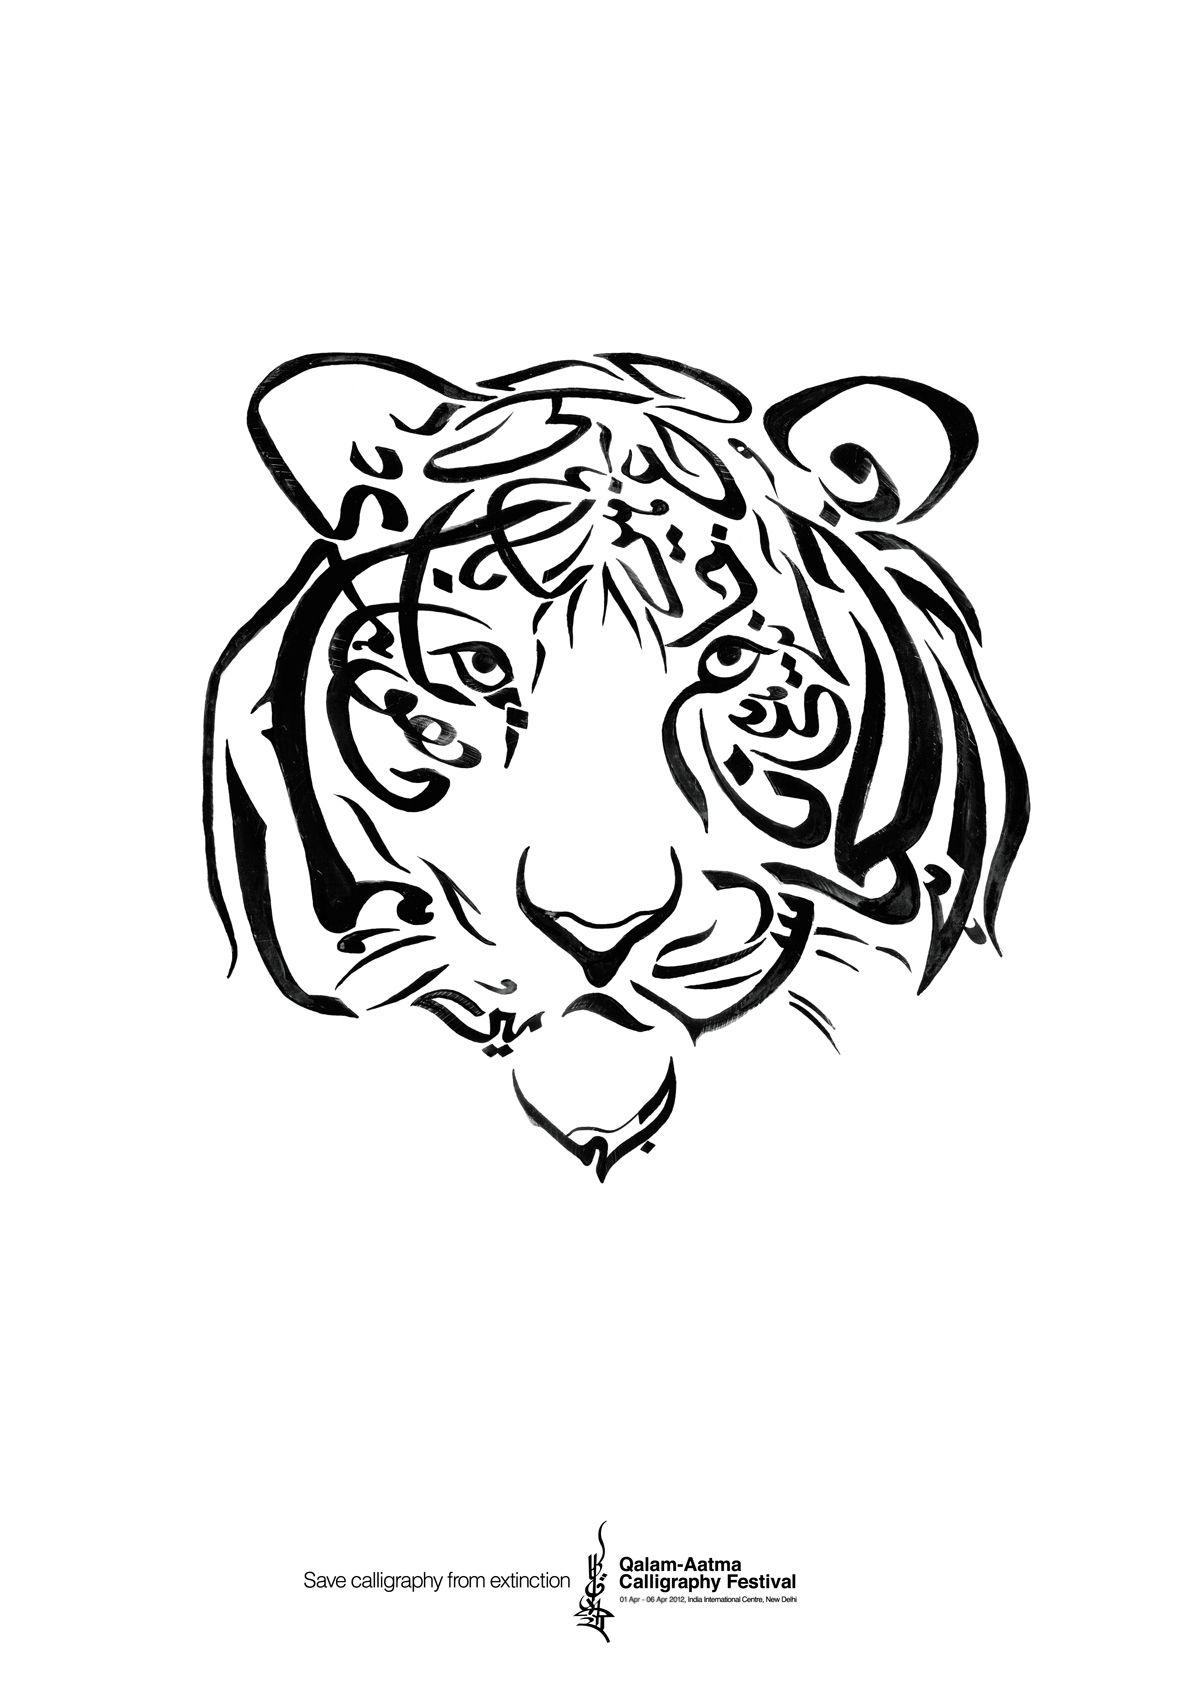 save calligraphy urdu Cannes lions campaign nasheet shadani Calligraphy   tiger Rhino Panda  animals Hand Made Typography persian